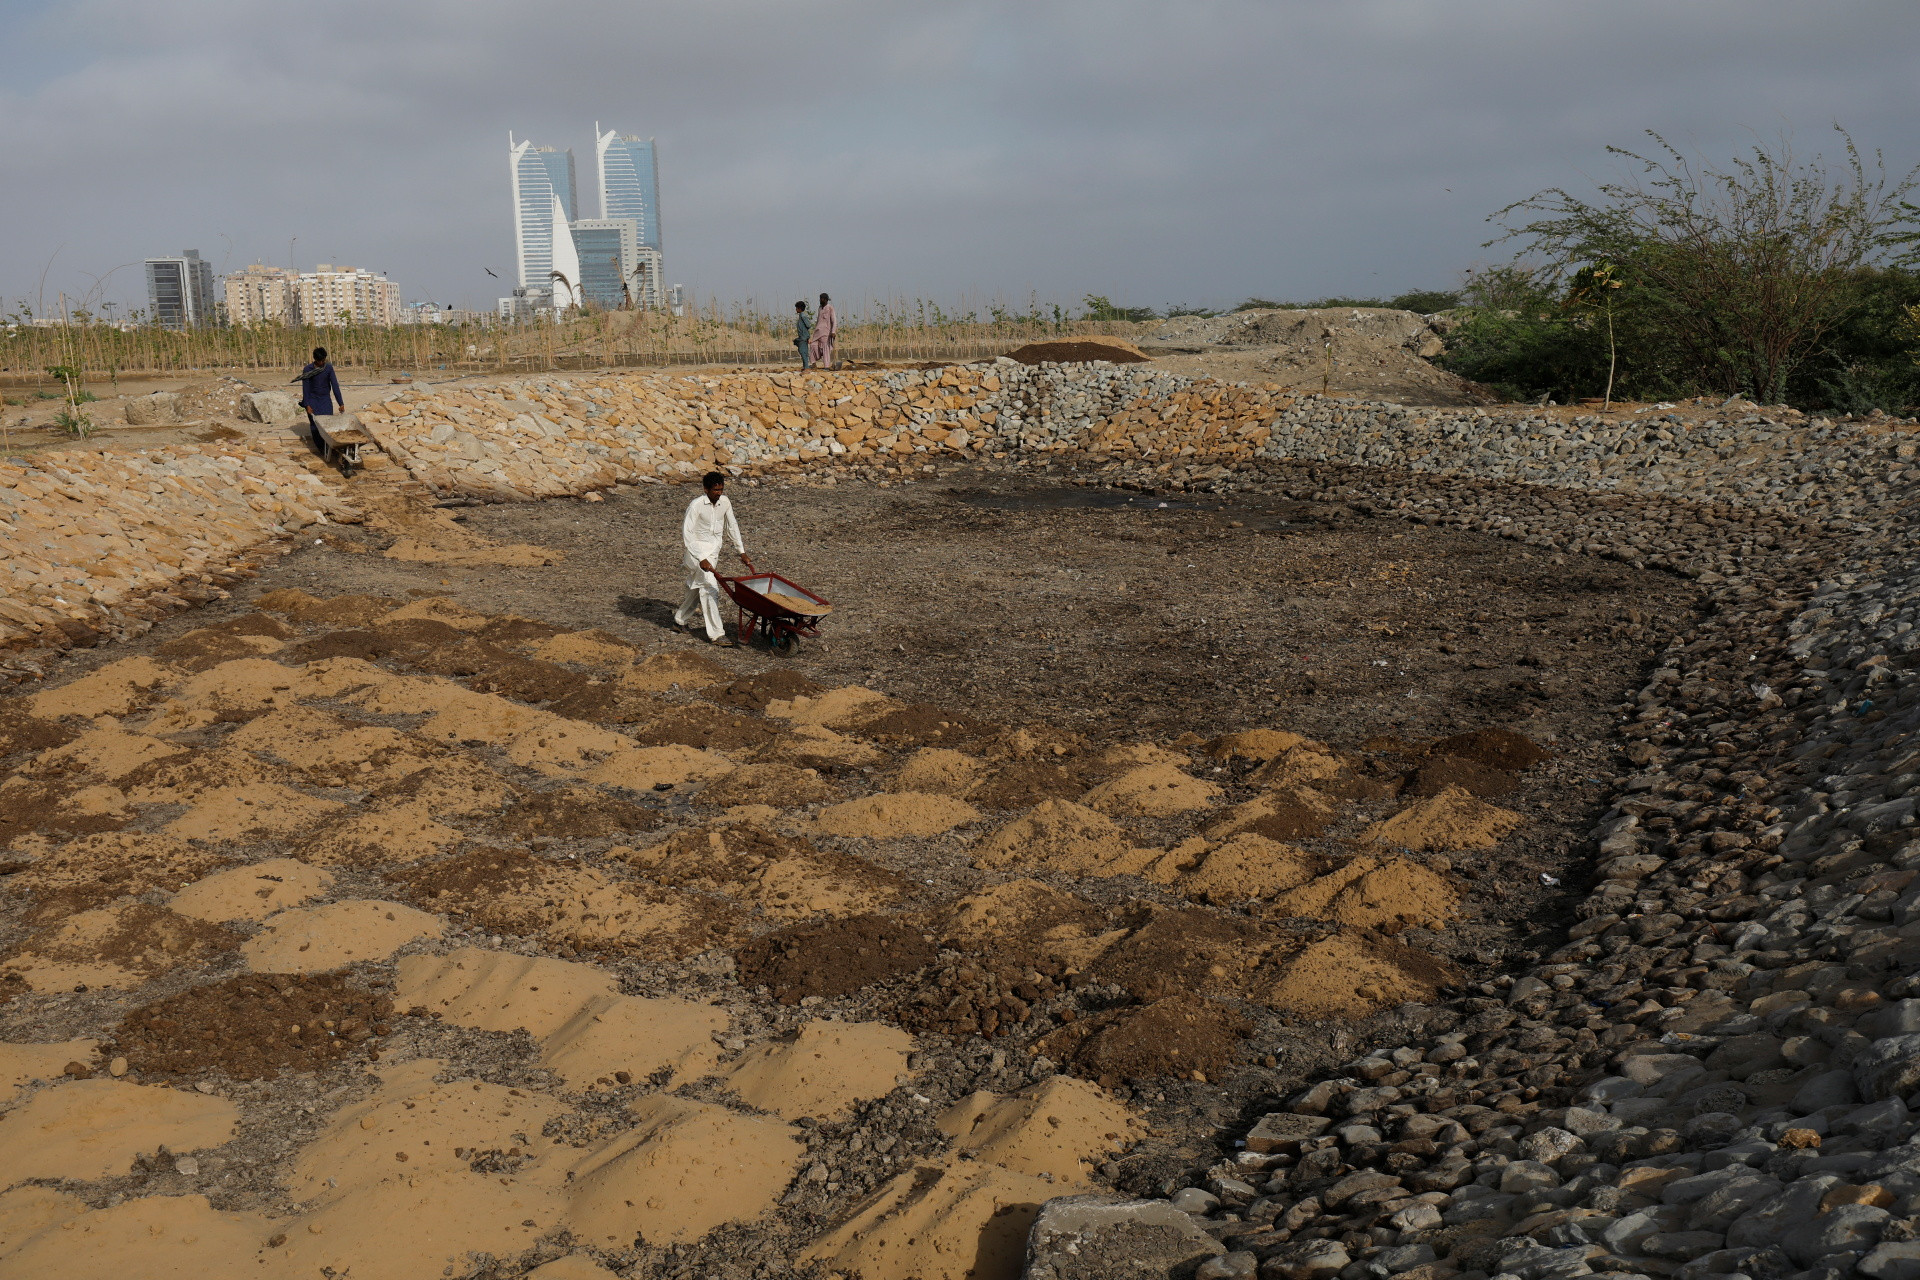 Workers prepare a pool with sand, molasses and soil which is going to be a part of the Clifton Urban Forest, May 26, 2021. REUTERS